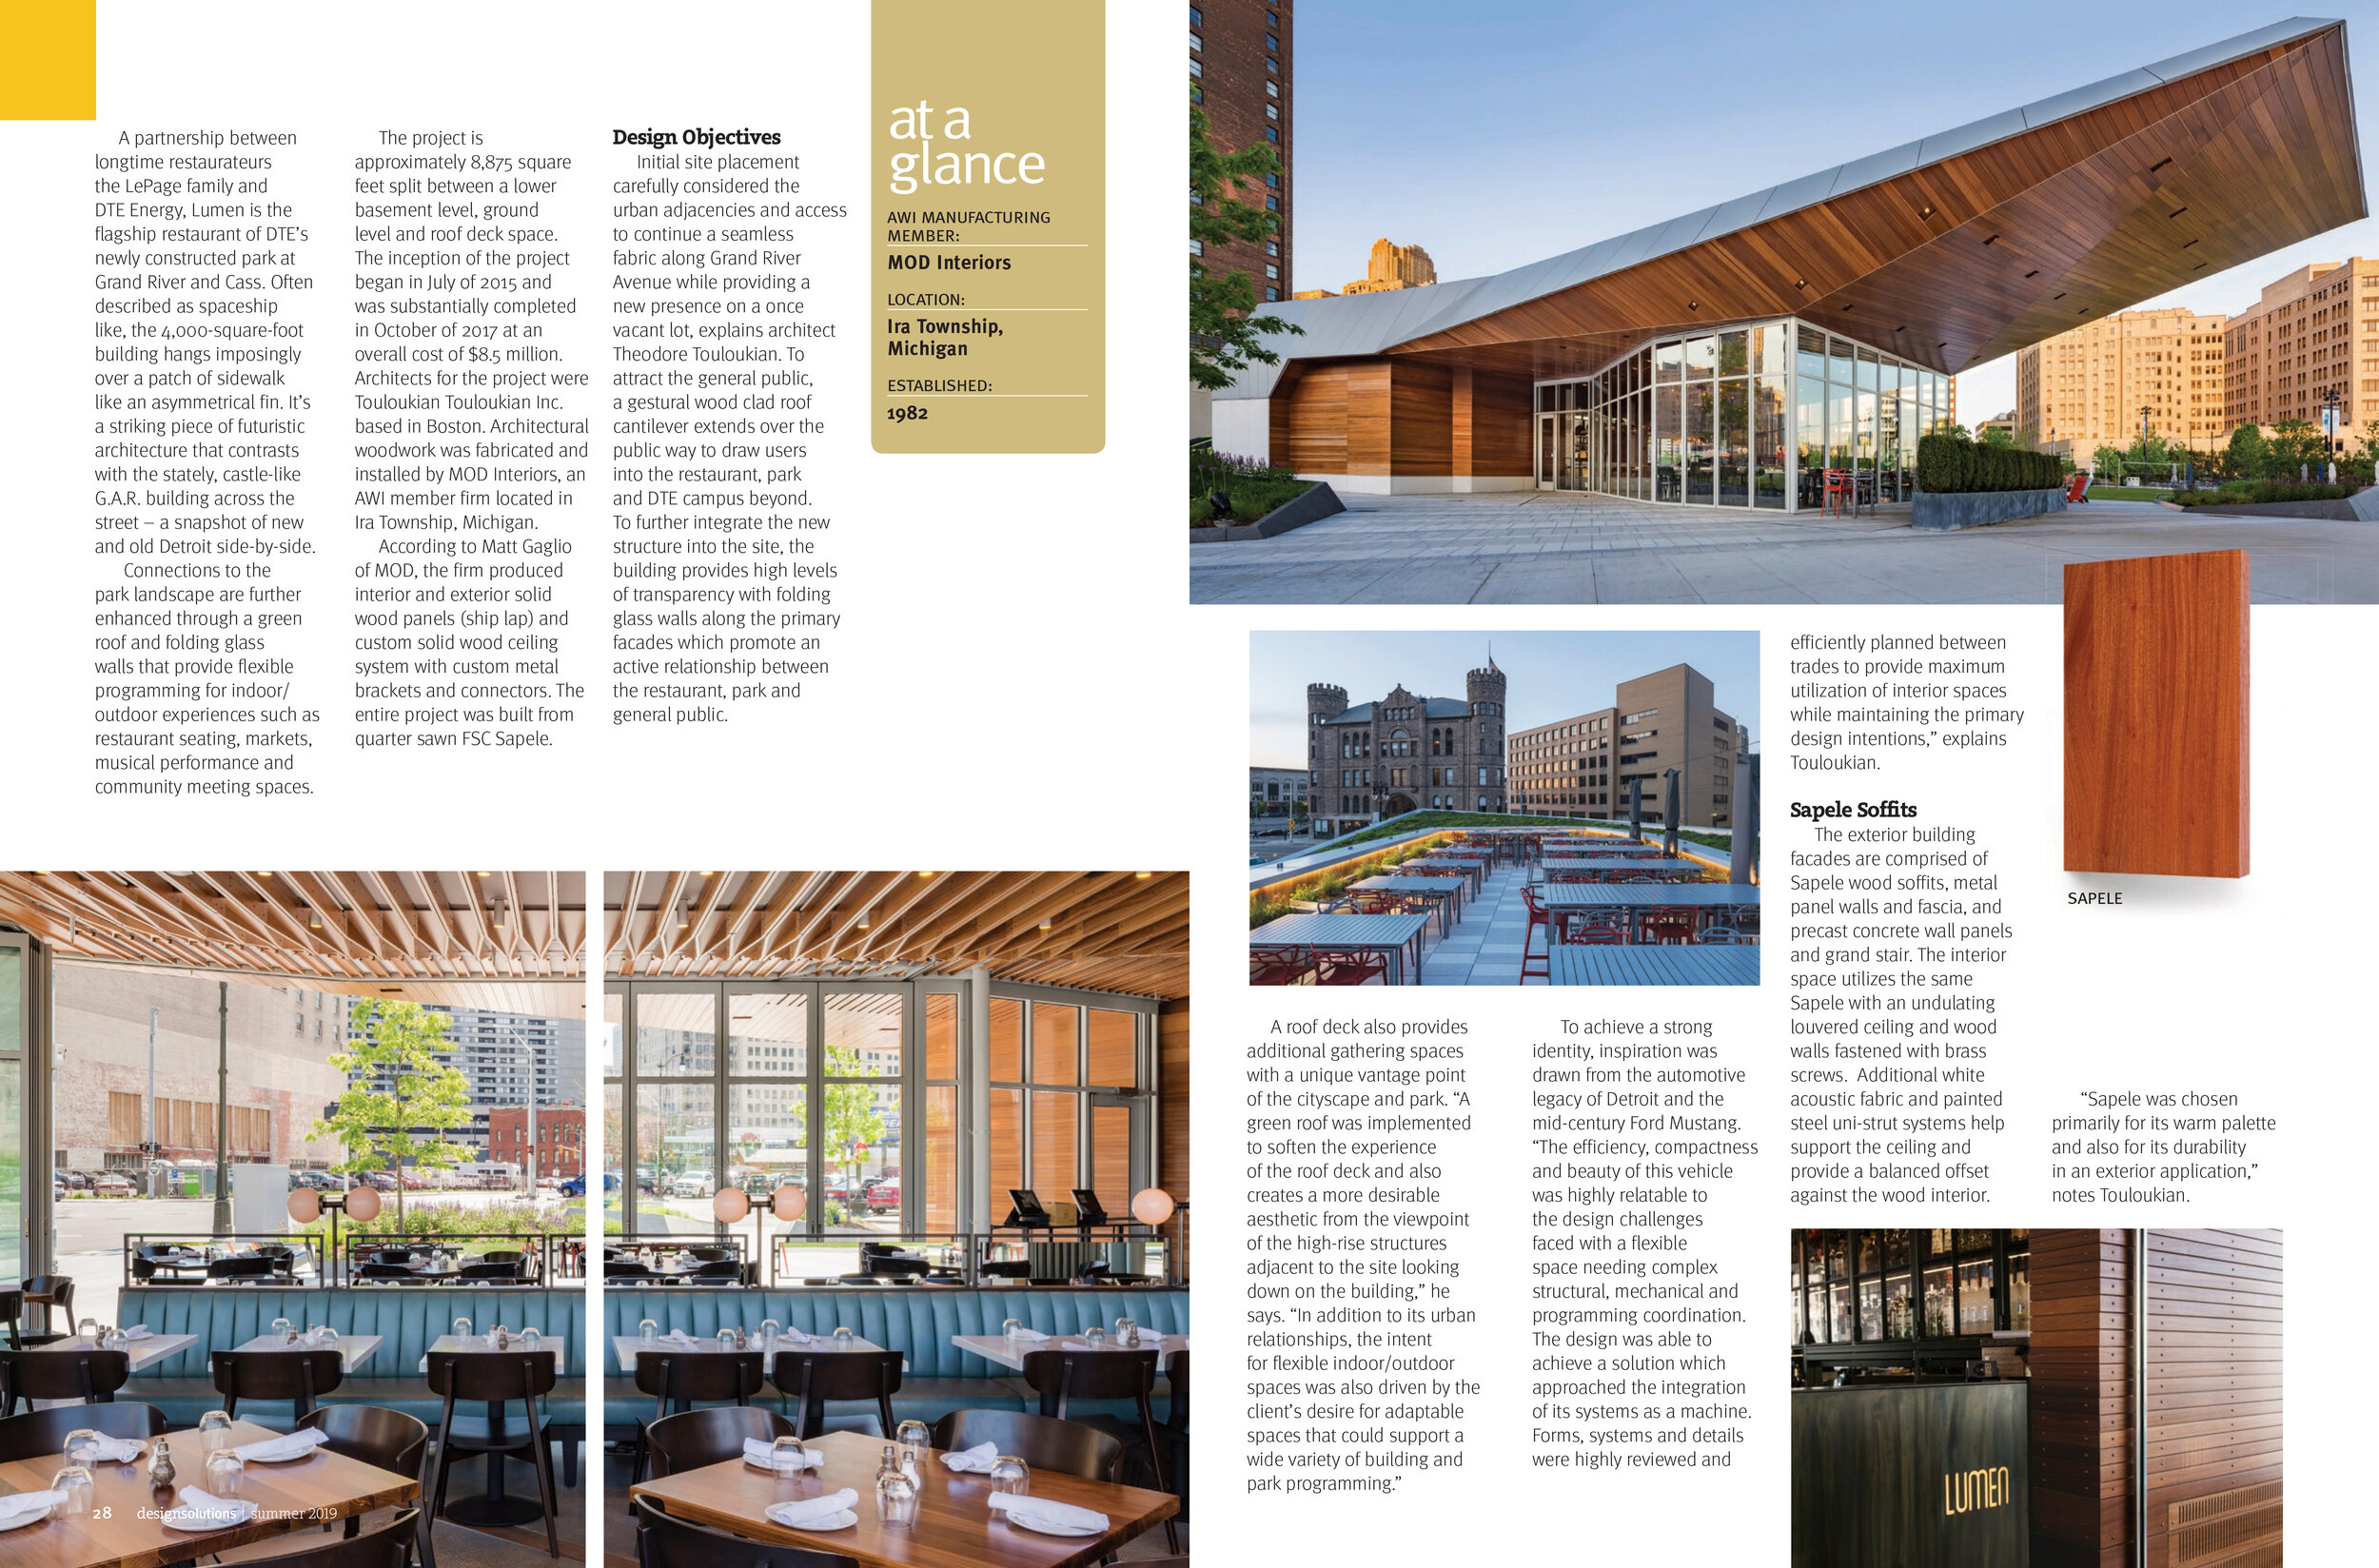 Dam Livlig afskaffe lumen at beacon park is published in architectural woodwork institute  design solutions magazine — Touloukian Touloukian Inc.